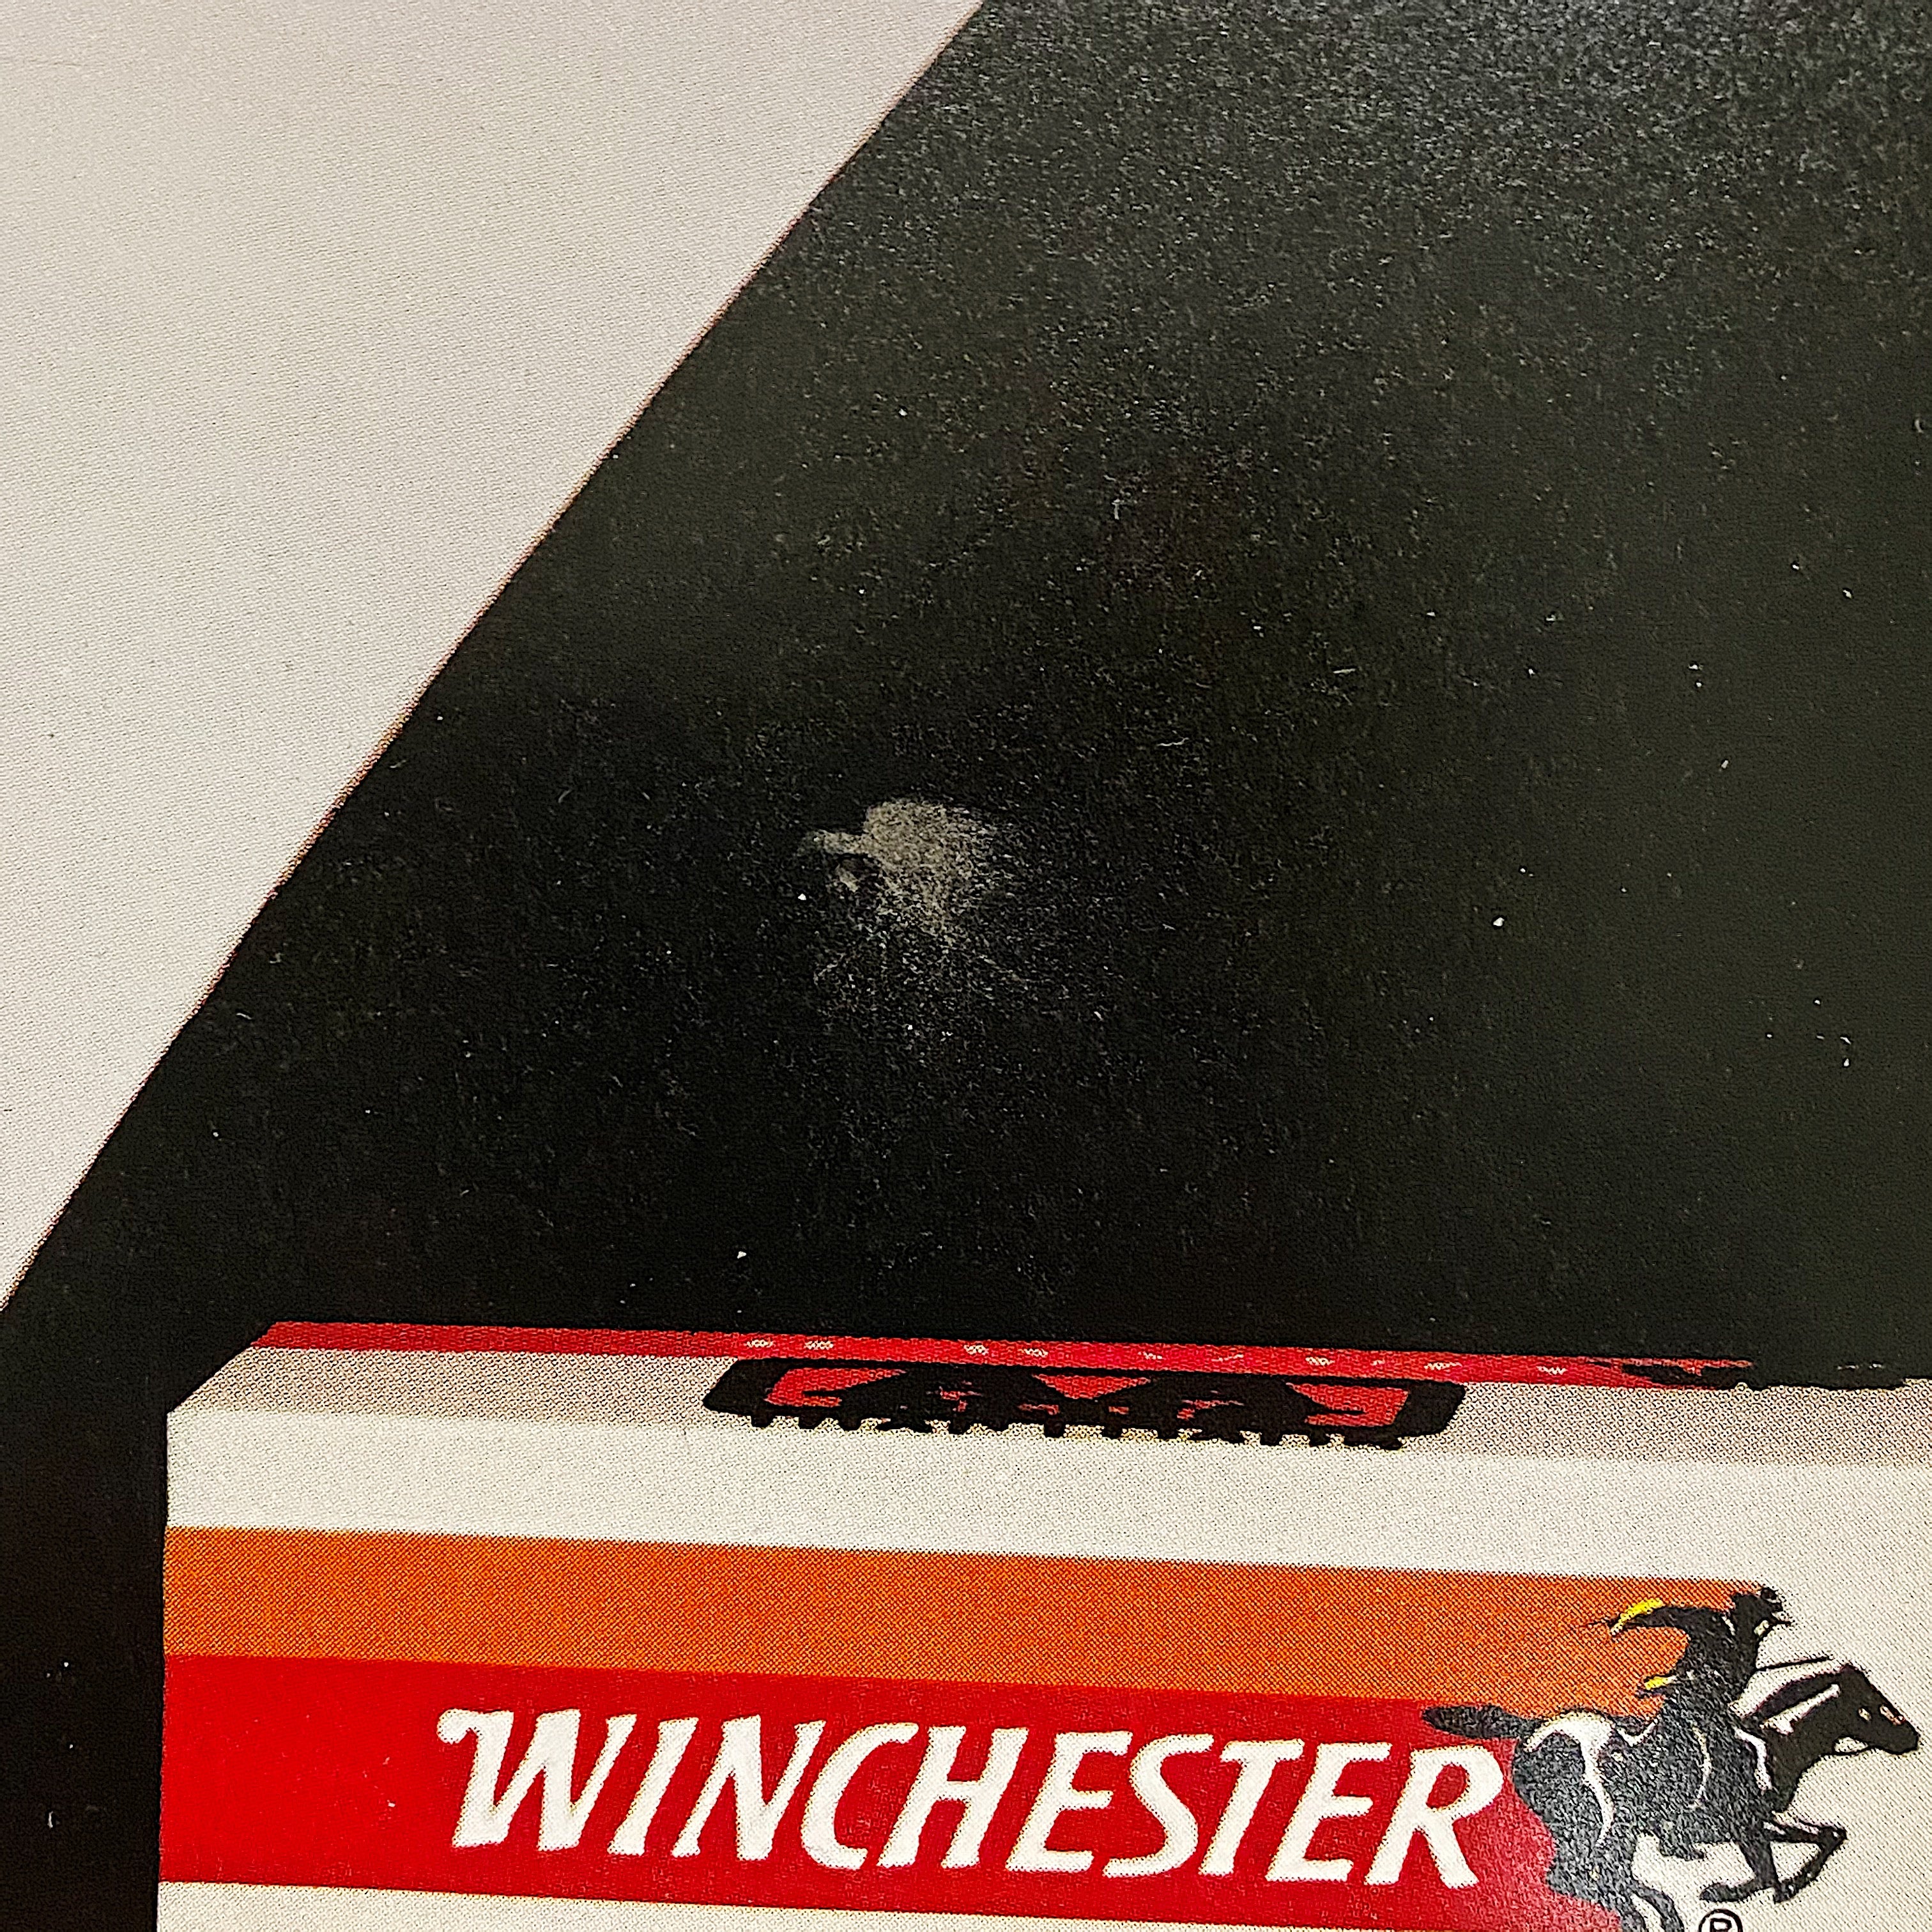 Rare Winchester Poster from 1982 | Bird Busters Offer You More